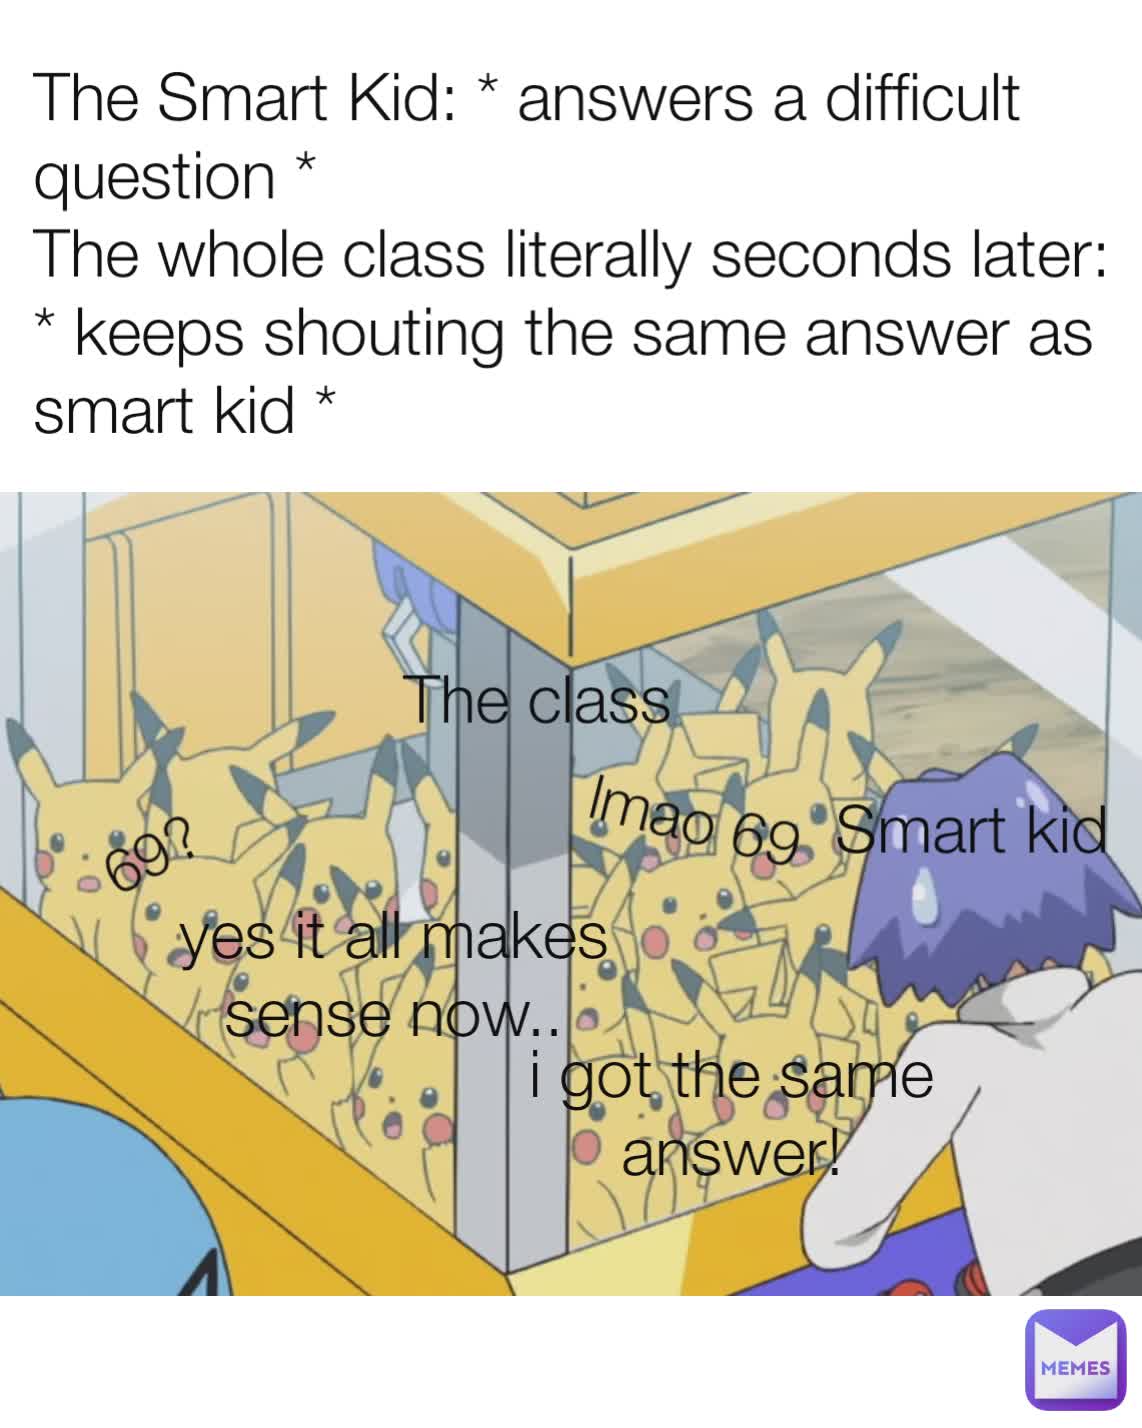 The Smart Kid: * answers a difficult question *
The whole class literally seconds later: * keeps shouting the same answer as smart kid * 69? lmao 69 Smart kid The class yes it all makes sense now.. i got the same answer!